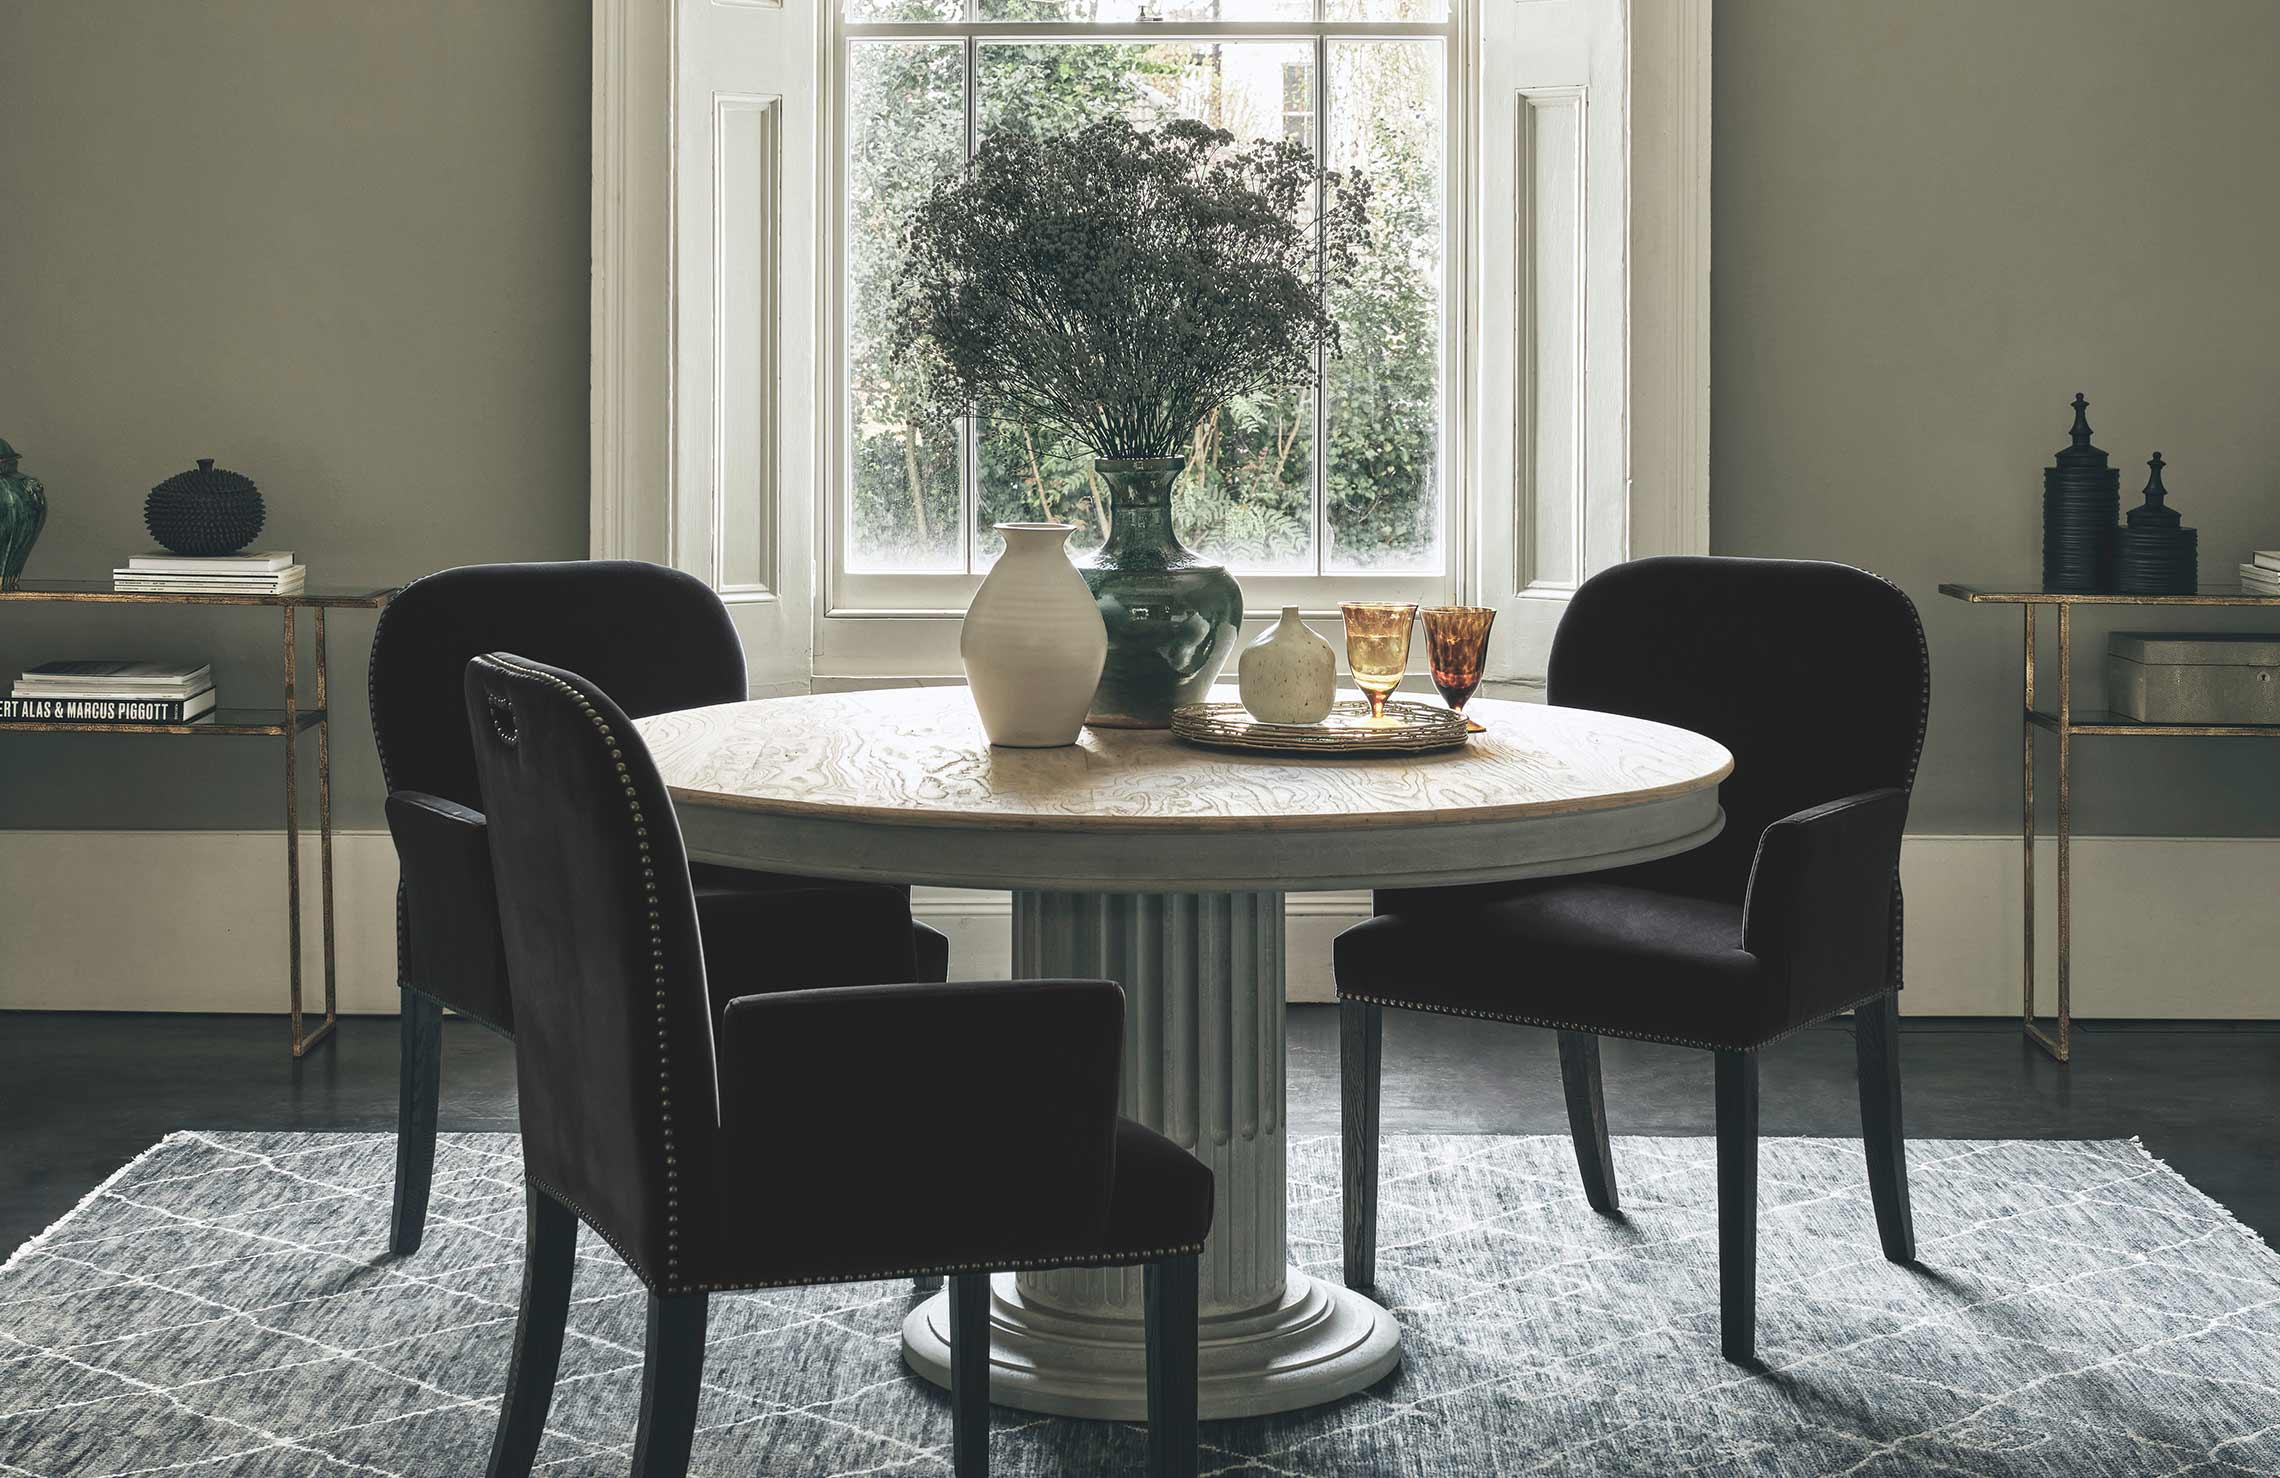 Choosing the best dining table shape for your room